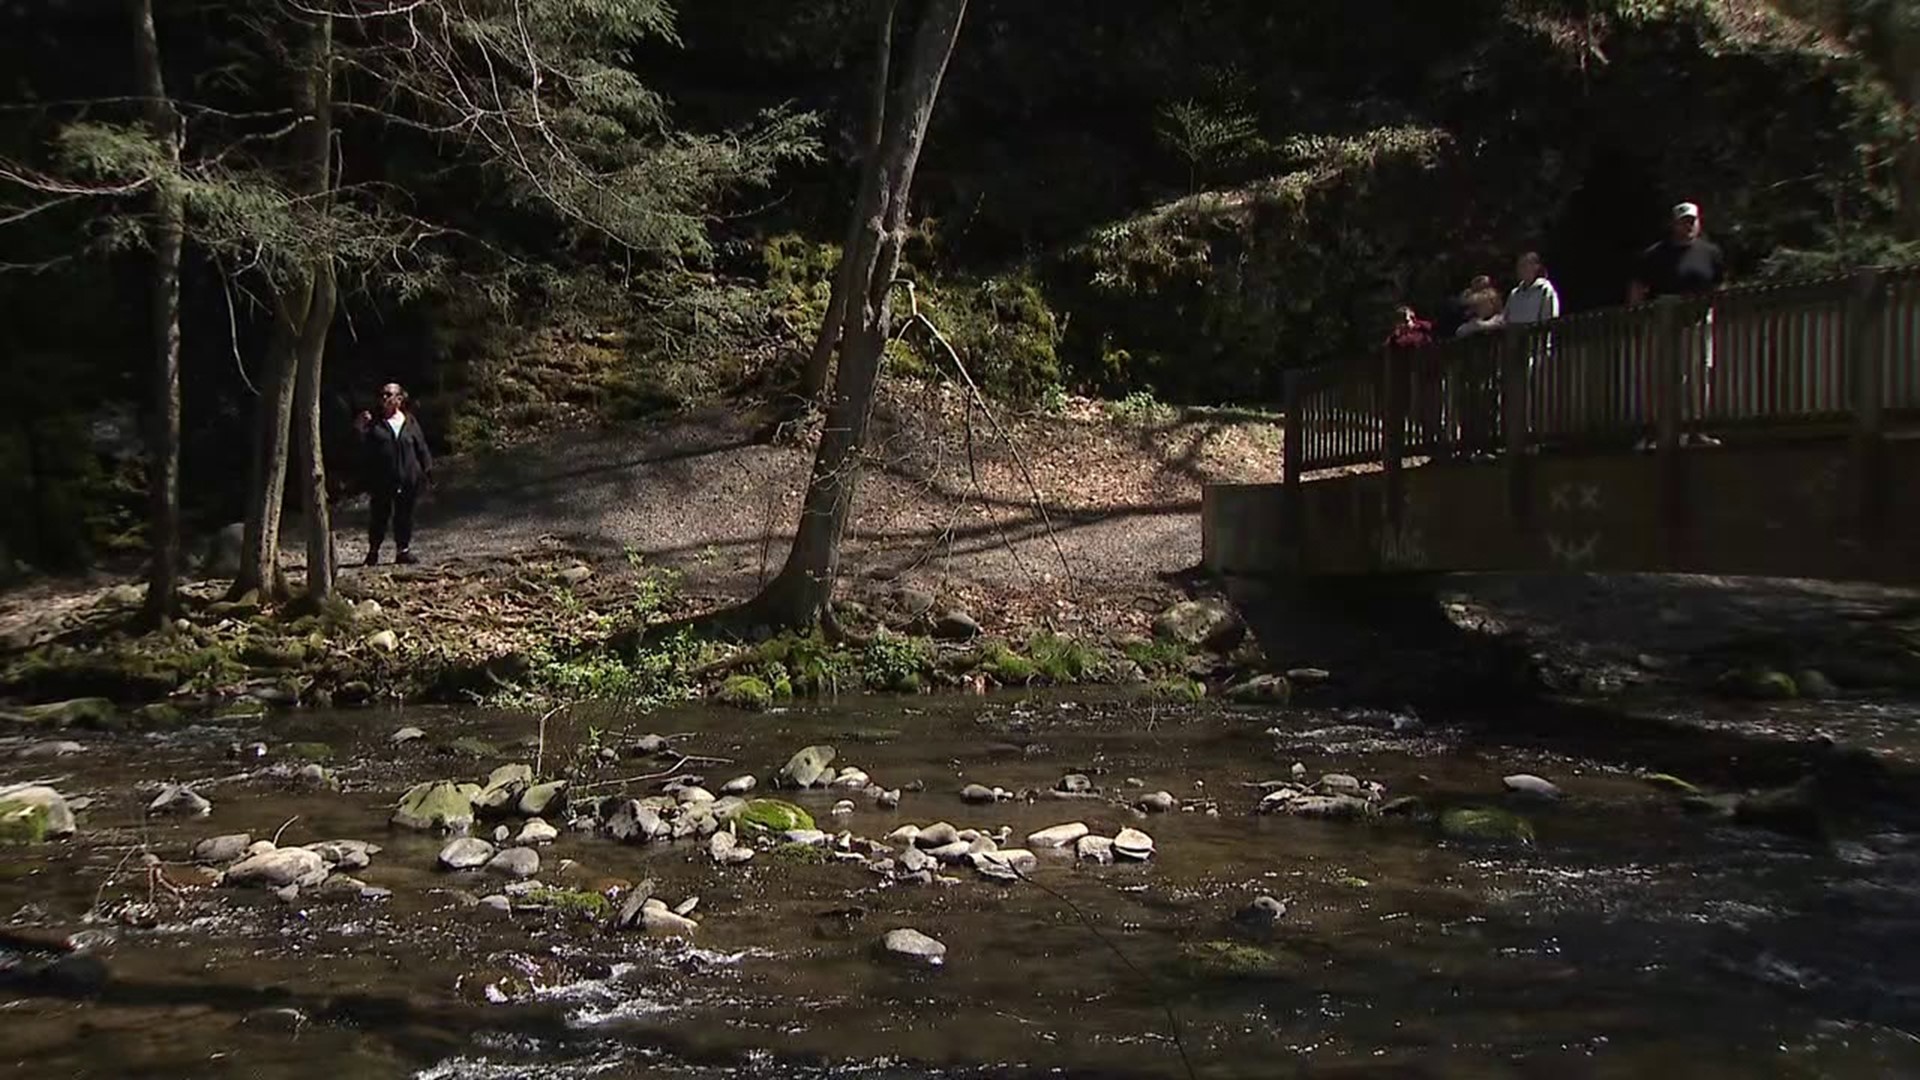 A new park in Monroe County was the perfect place to spend Earth Day. Newswatch 16's Emily Kress shares all that Marshalls Falls Park has to offer.